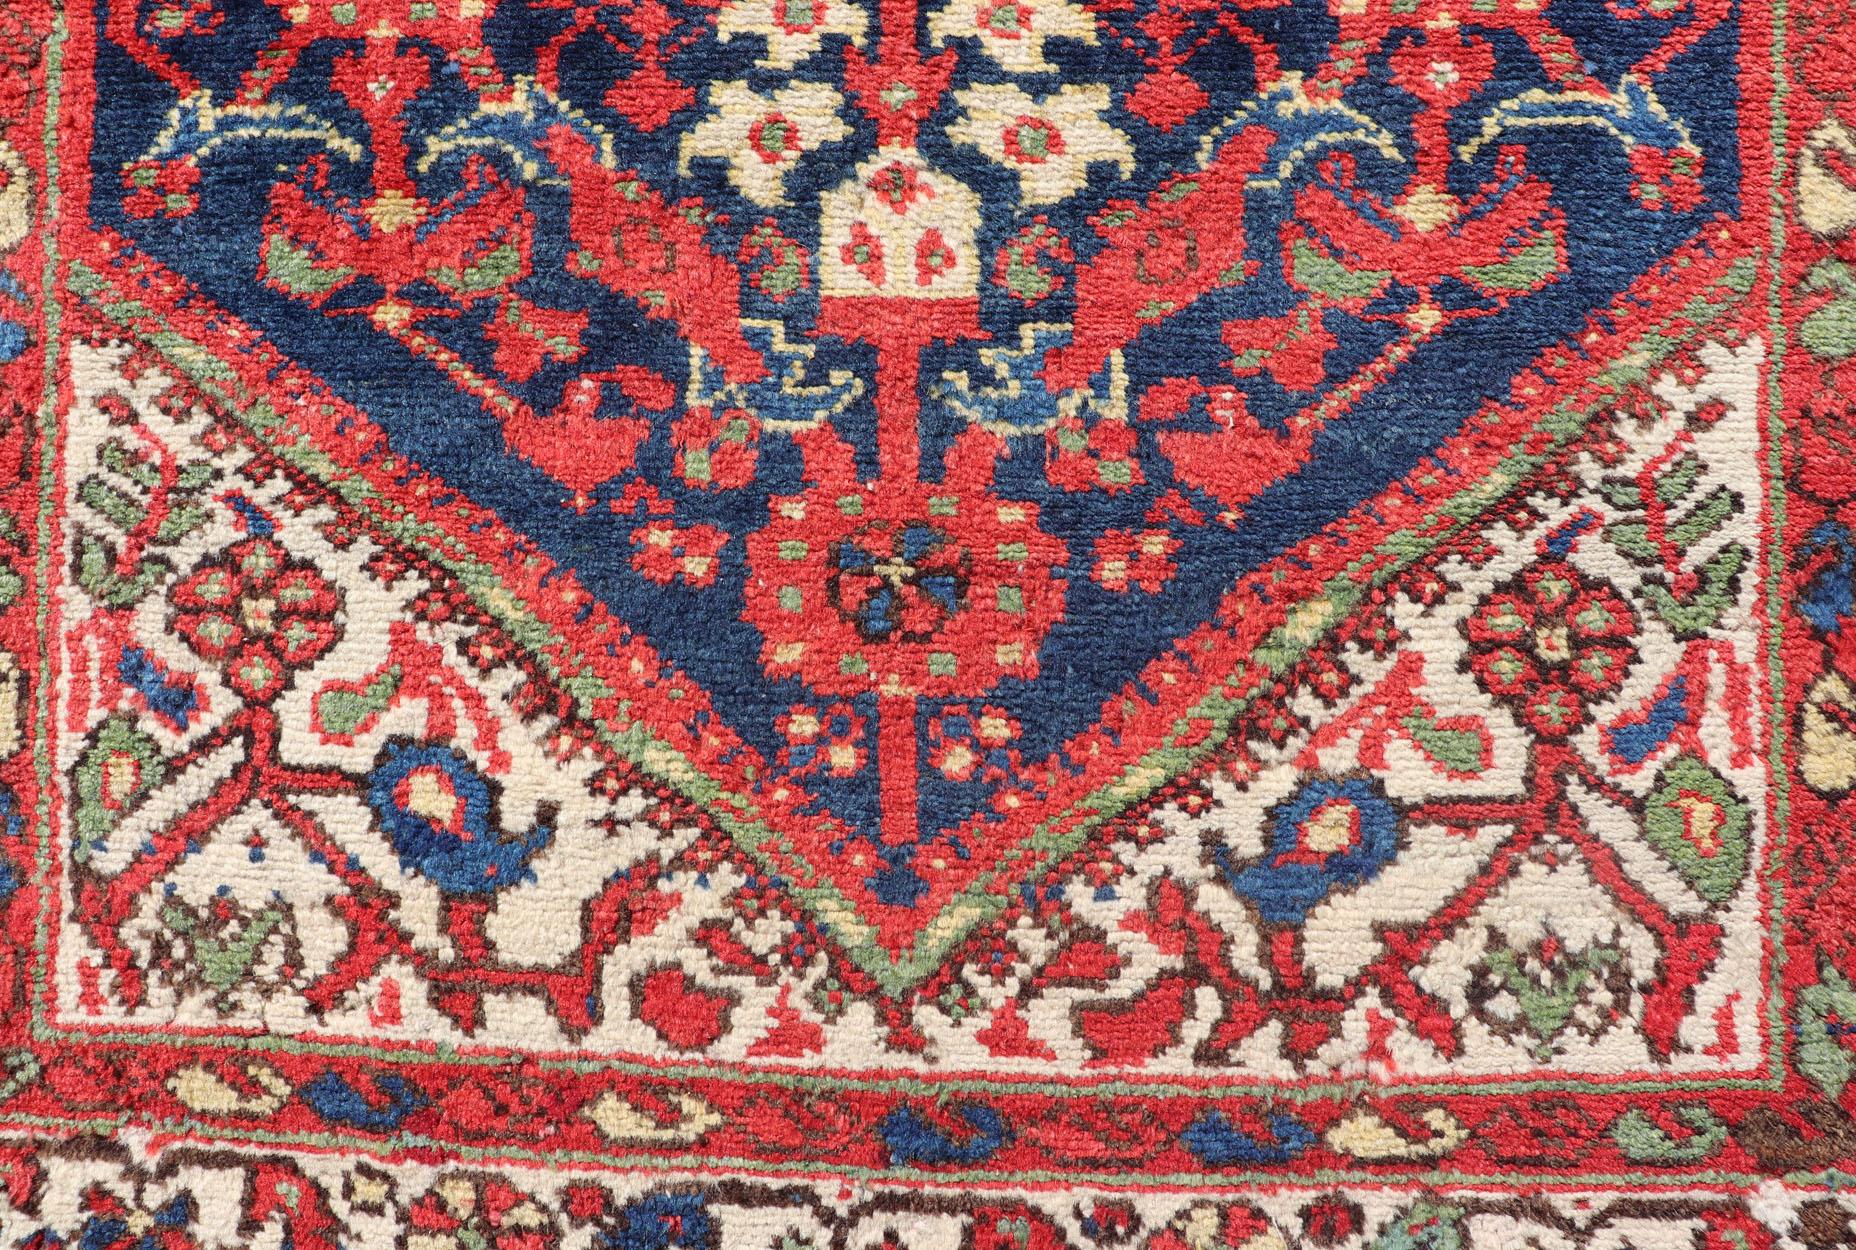 Malayer antique runner from Persia with geometric floral central field design, Keivan Woven Arts/ rug/ PTA-21003, country of origin / type: Iran / Malayer, circa 1930.
Measures: 3'4 x 12'10.